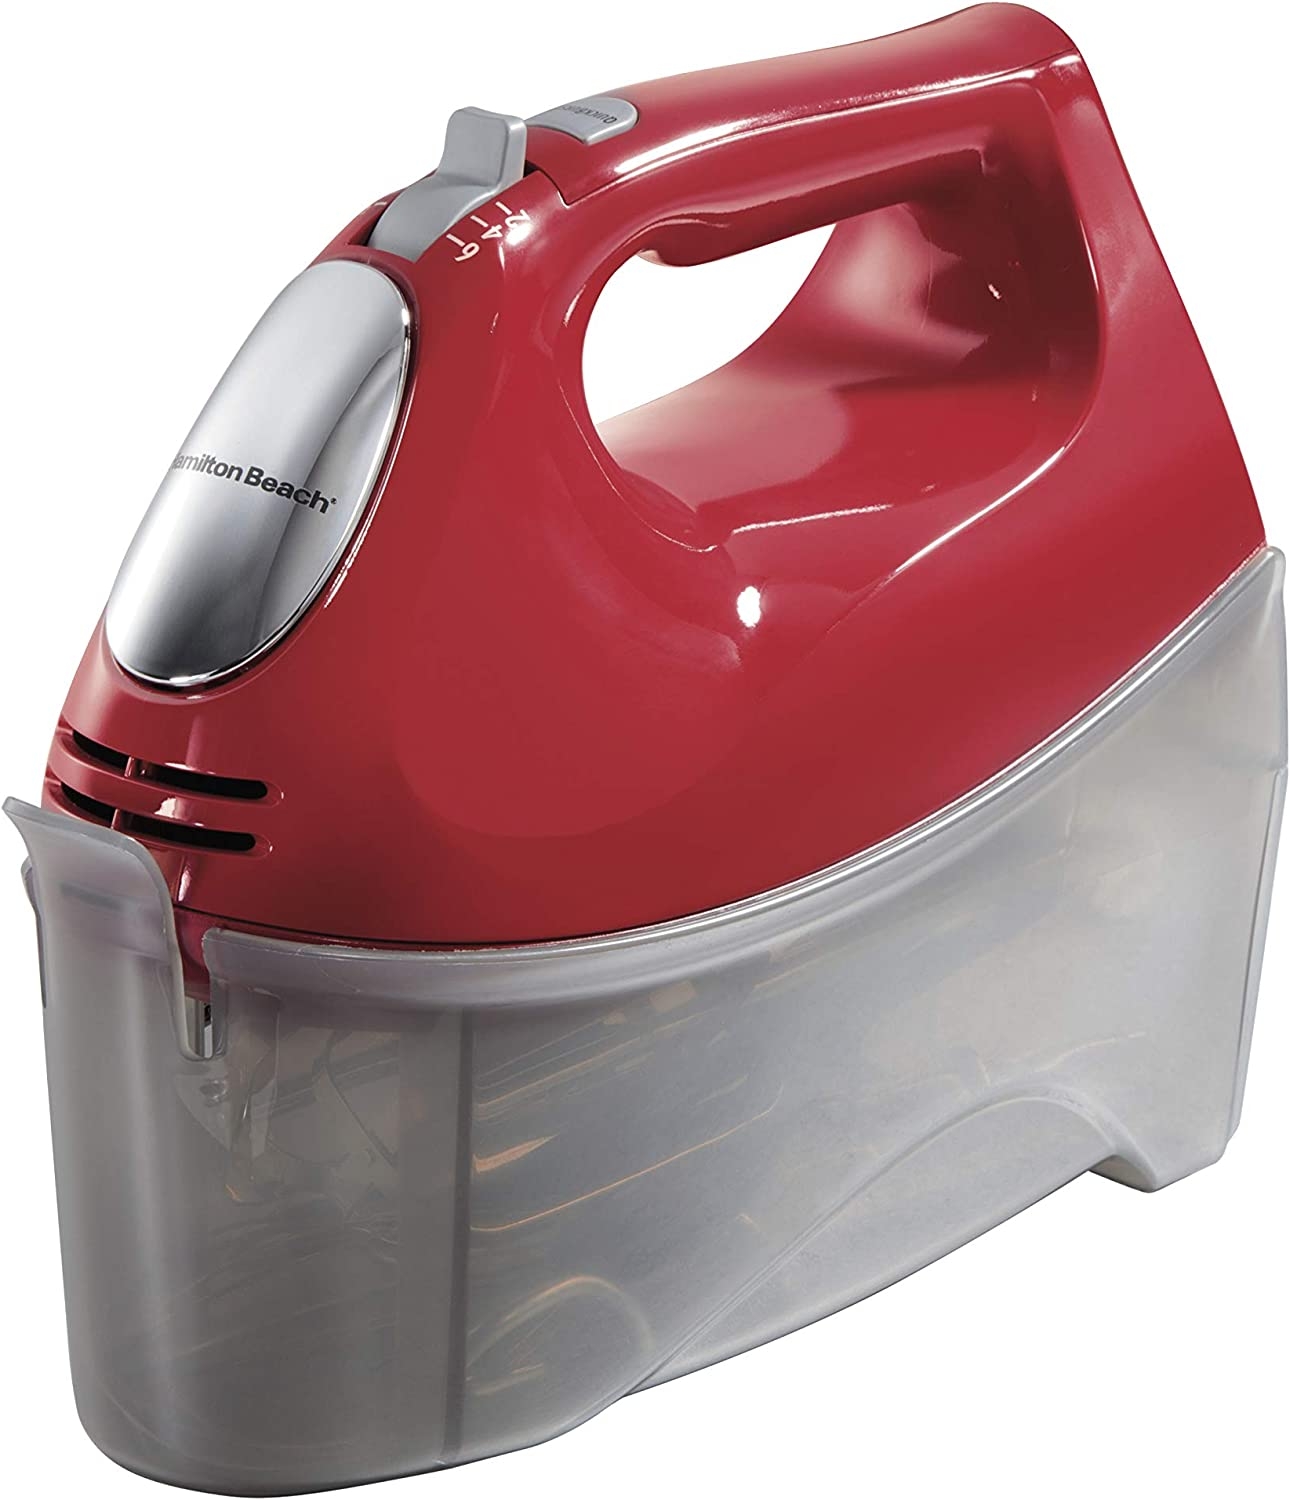 Hamilton Beach 6-Speed Electric Hand Mixer, Beaters and Whisk, with Snap-On Storage Case, Red Import To Shop ×Product